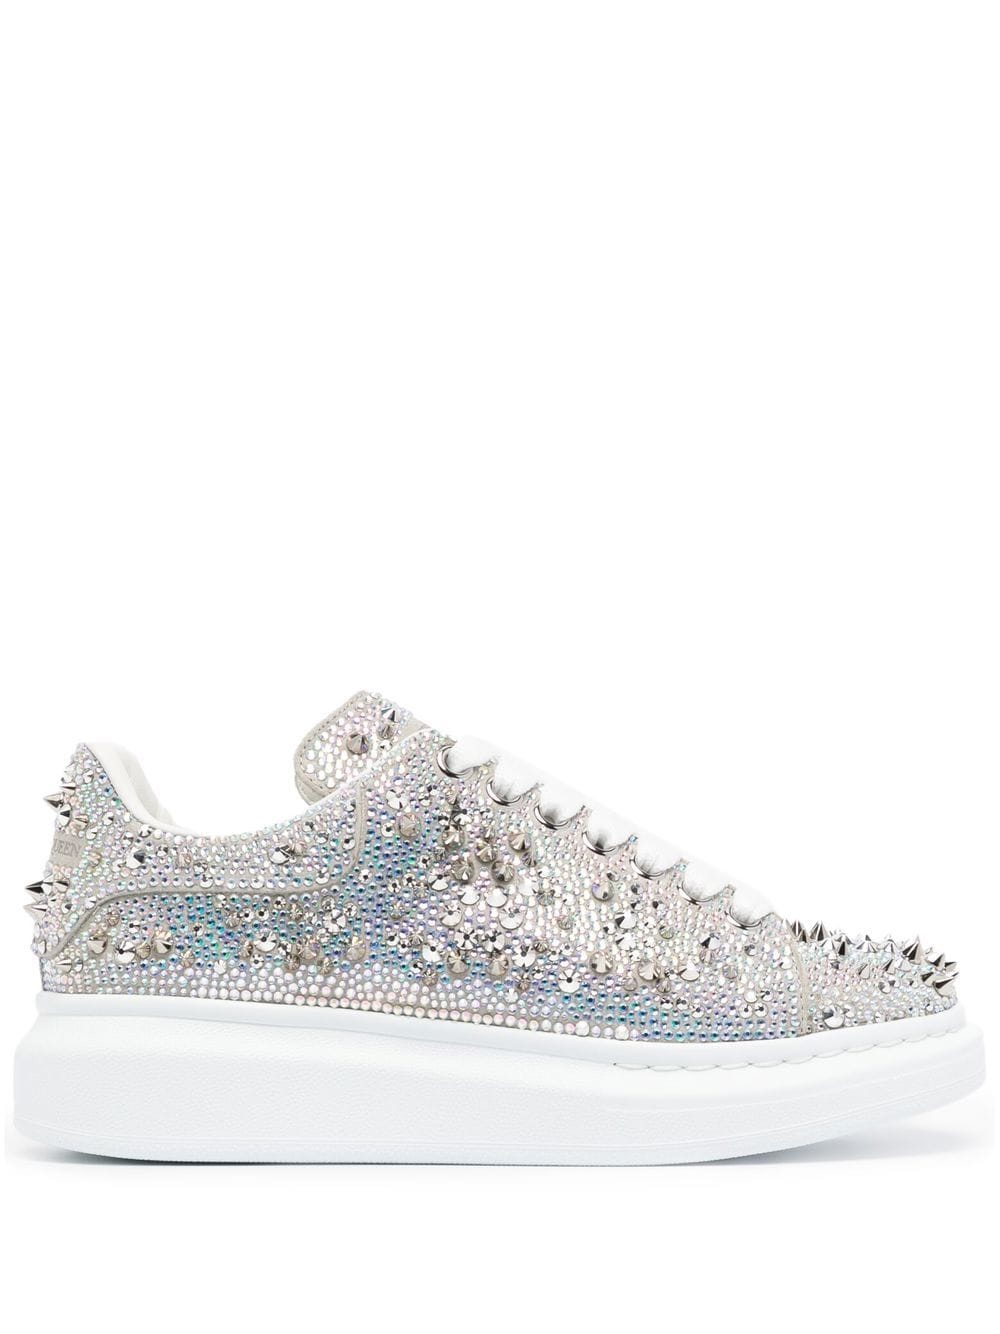 ✨New ALEXANDER MCQUEEN Crystal Embellished Oversized Sneakers White Size  37.5 | eBay